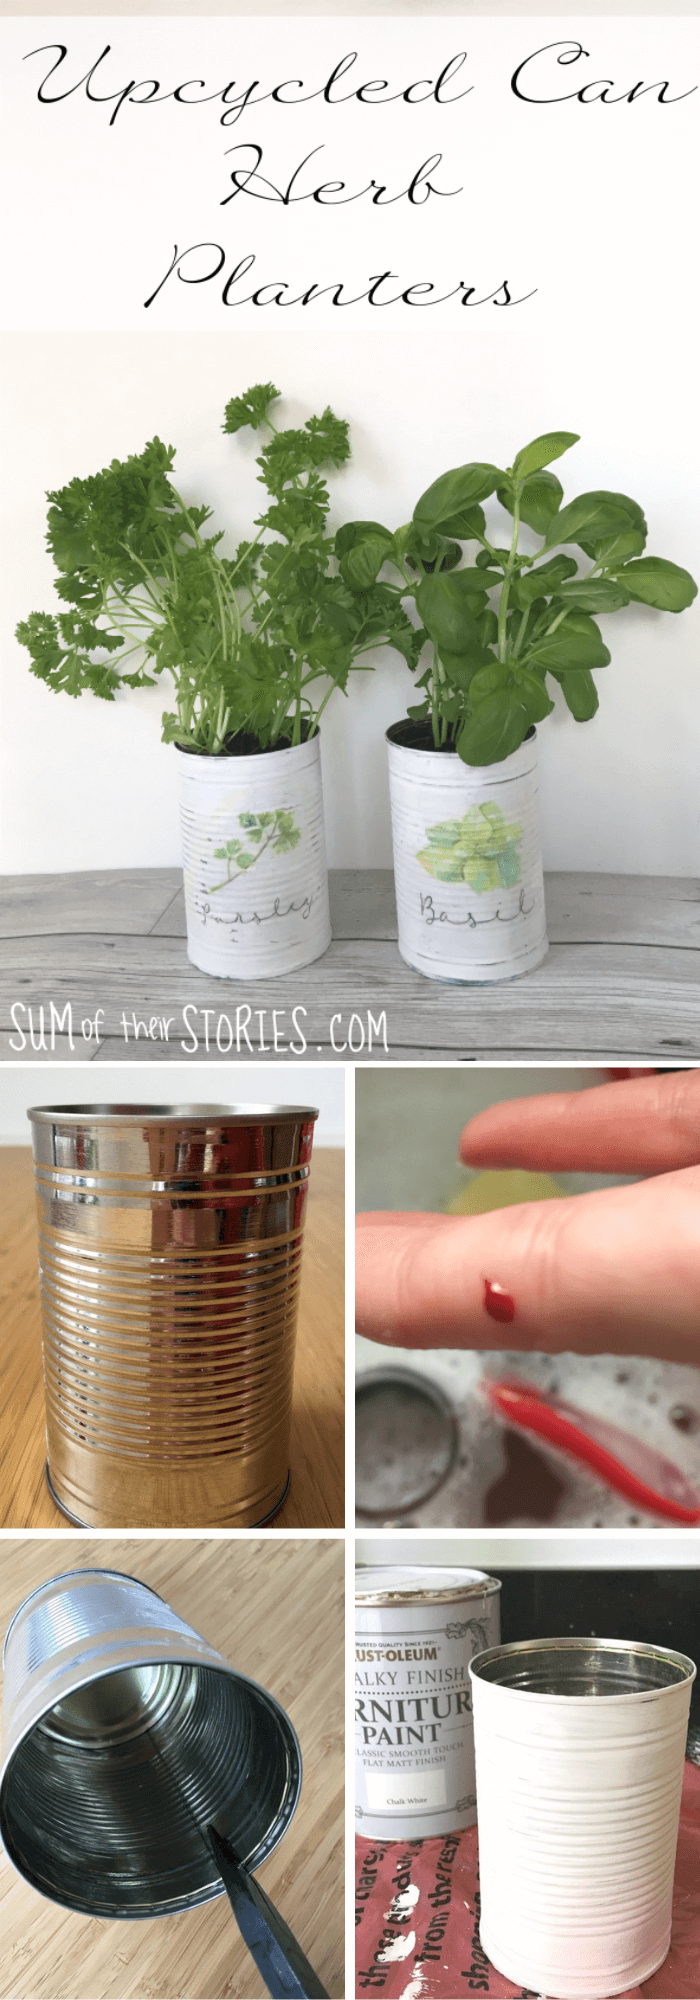 Upcycled Can Herb Planters